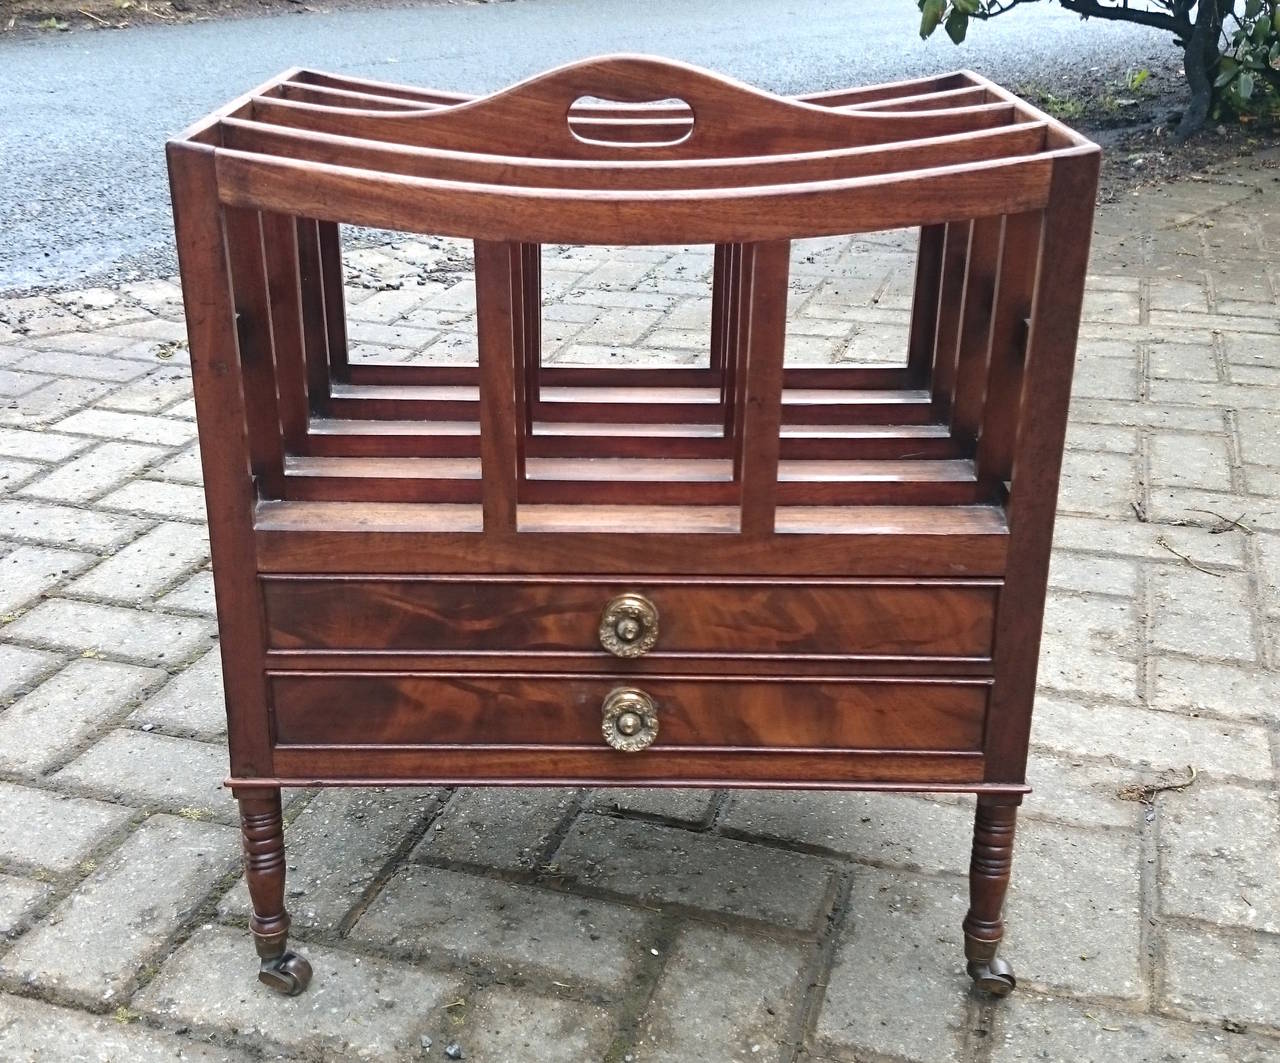 Early 19th century antique canterbury, this canterbury is made of mahogany with flame mahogany drawer fronts. The handles are gilt brass and the turned legs and delicate proportions are typical of the transitional period between George III and